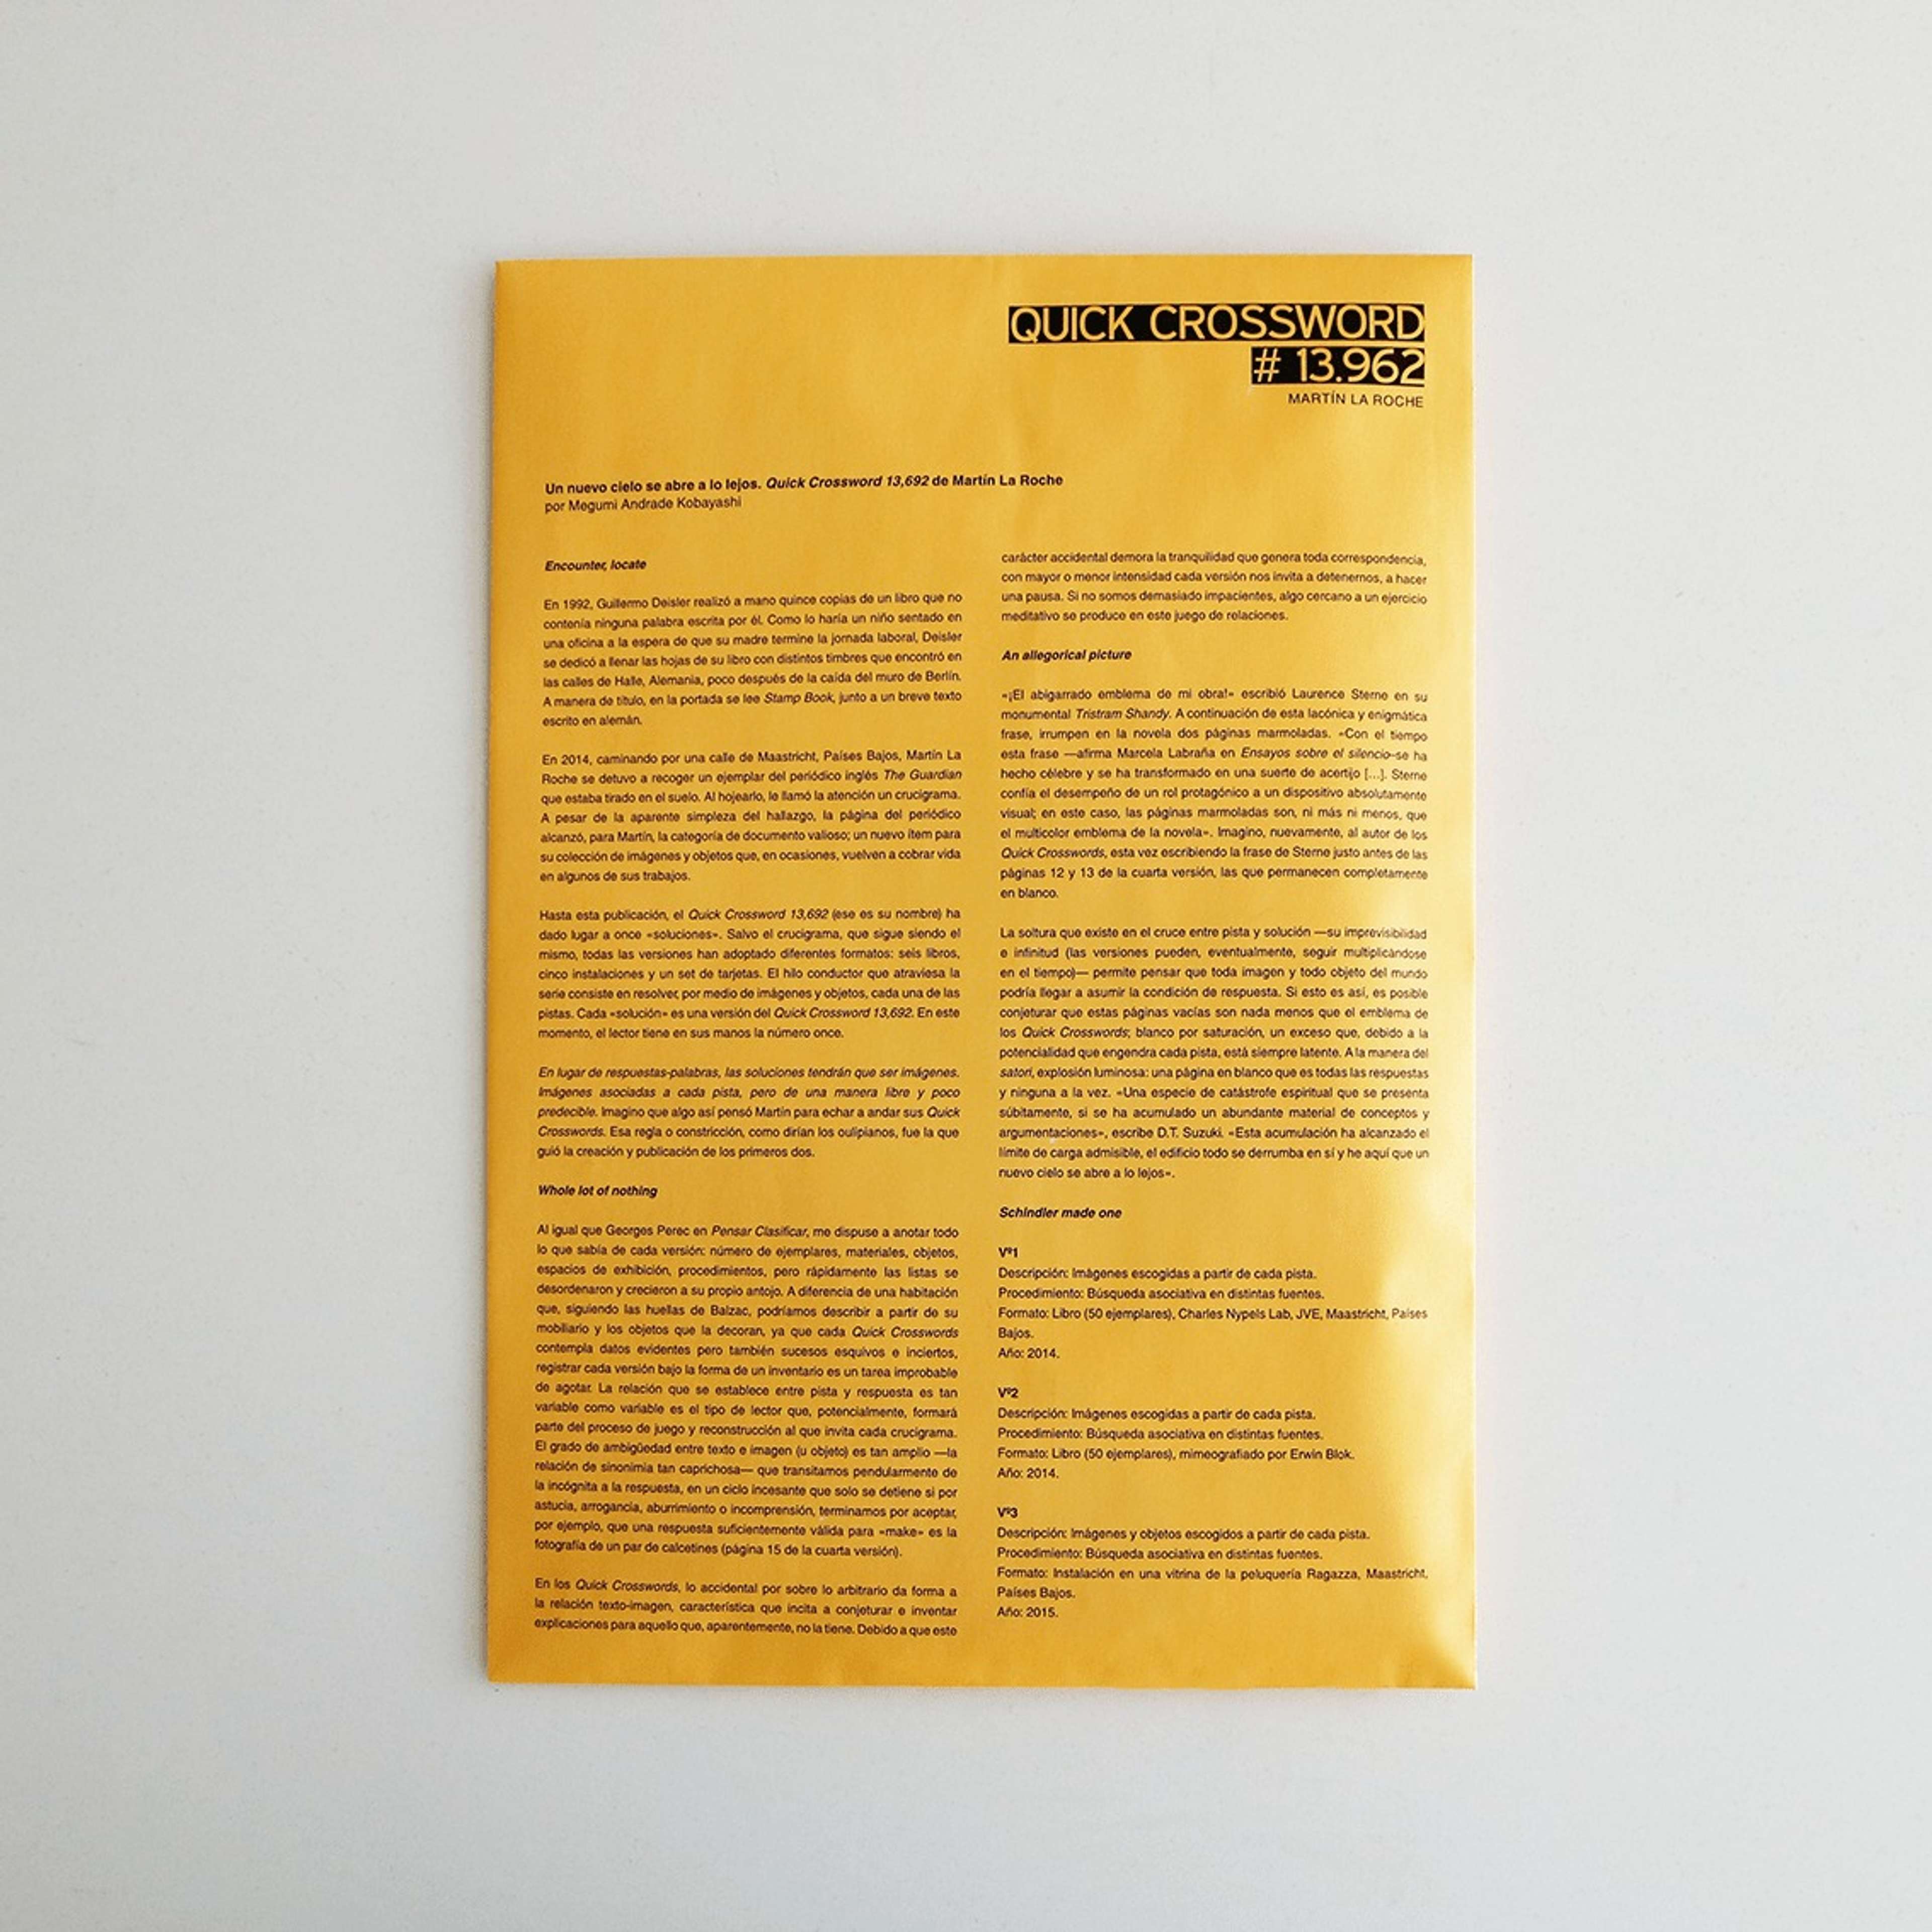 Edited and designed by Naranja Publicaciones,

Includes a text by Megumi Andrade Kobayashi.